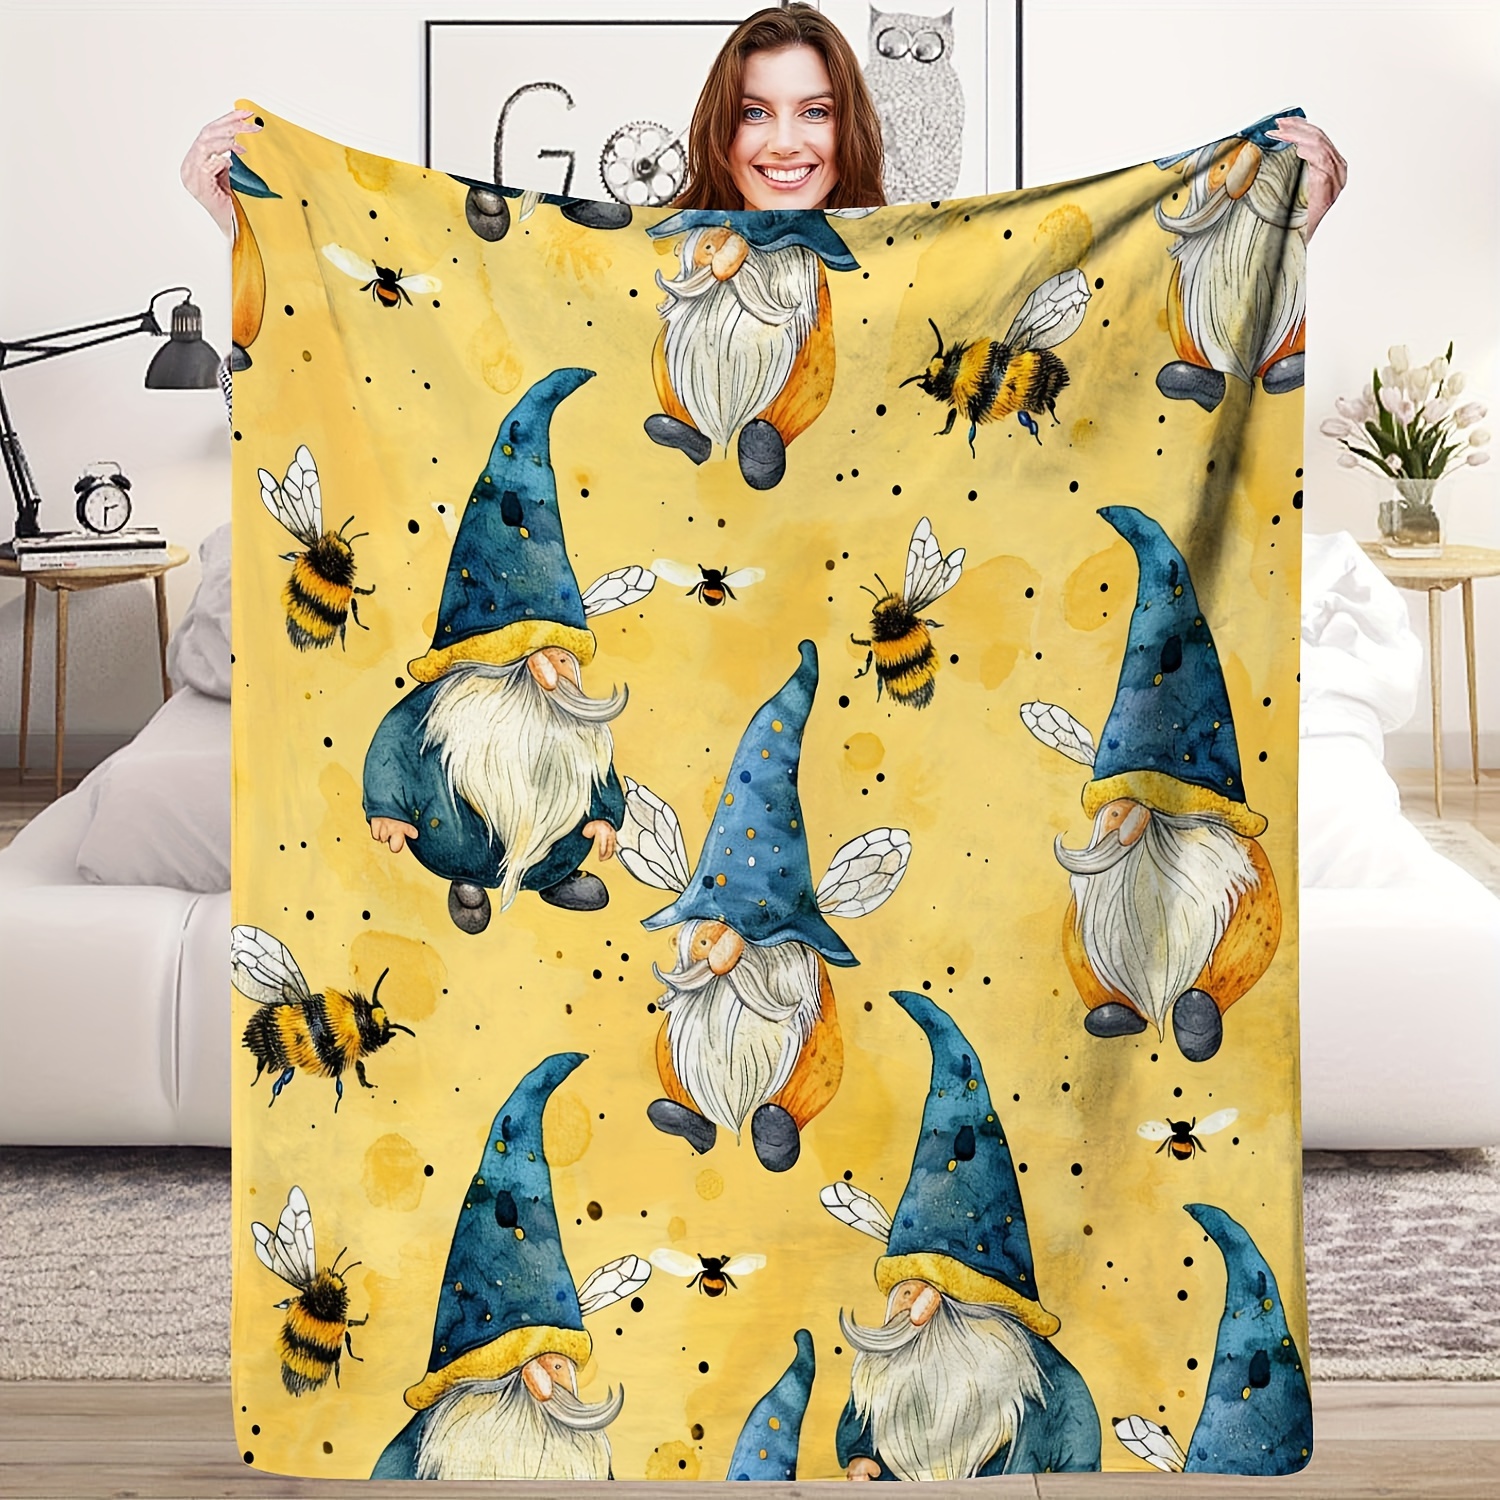 

Cartoon Gnome And Bee Pattern Style Throw Blanket - Cozy Soft Flannel Fleece, All-season Knitted Polyester Bedding, Unique Embellished Home Decor - 59x79 Inches